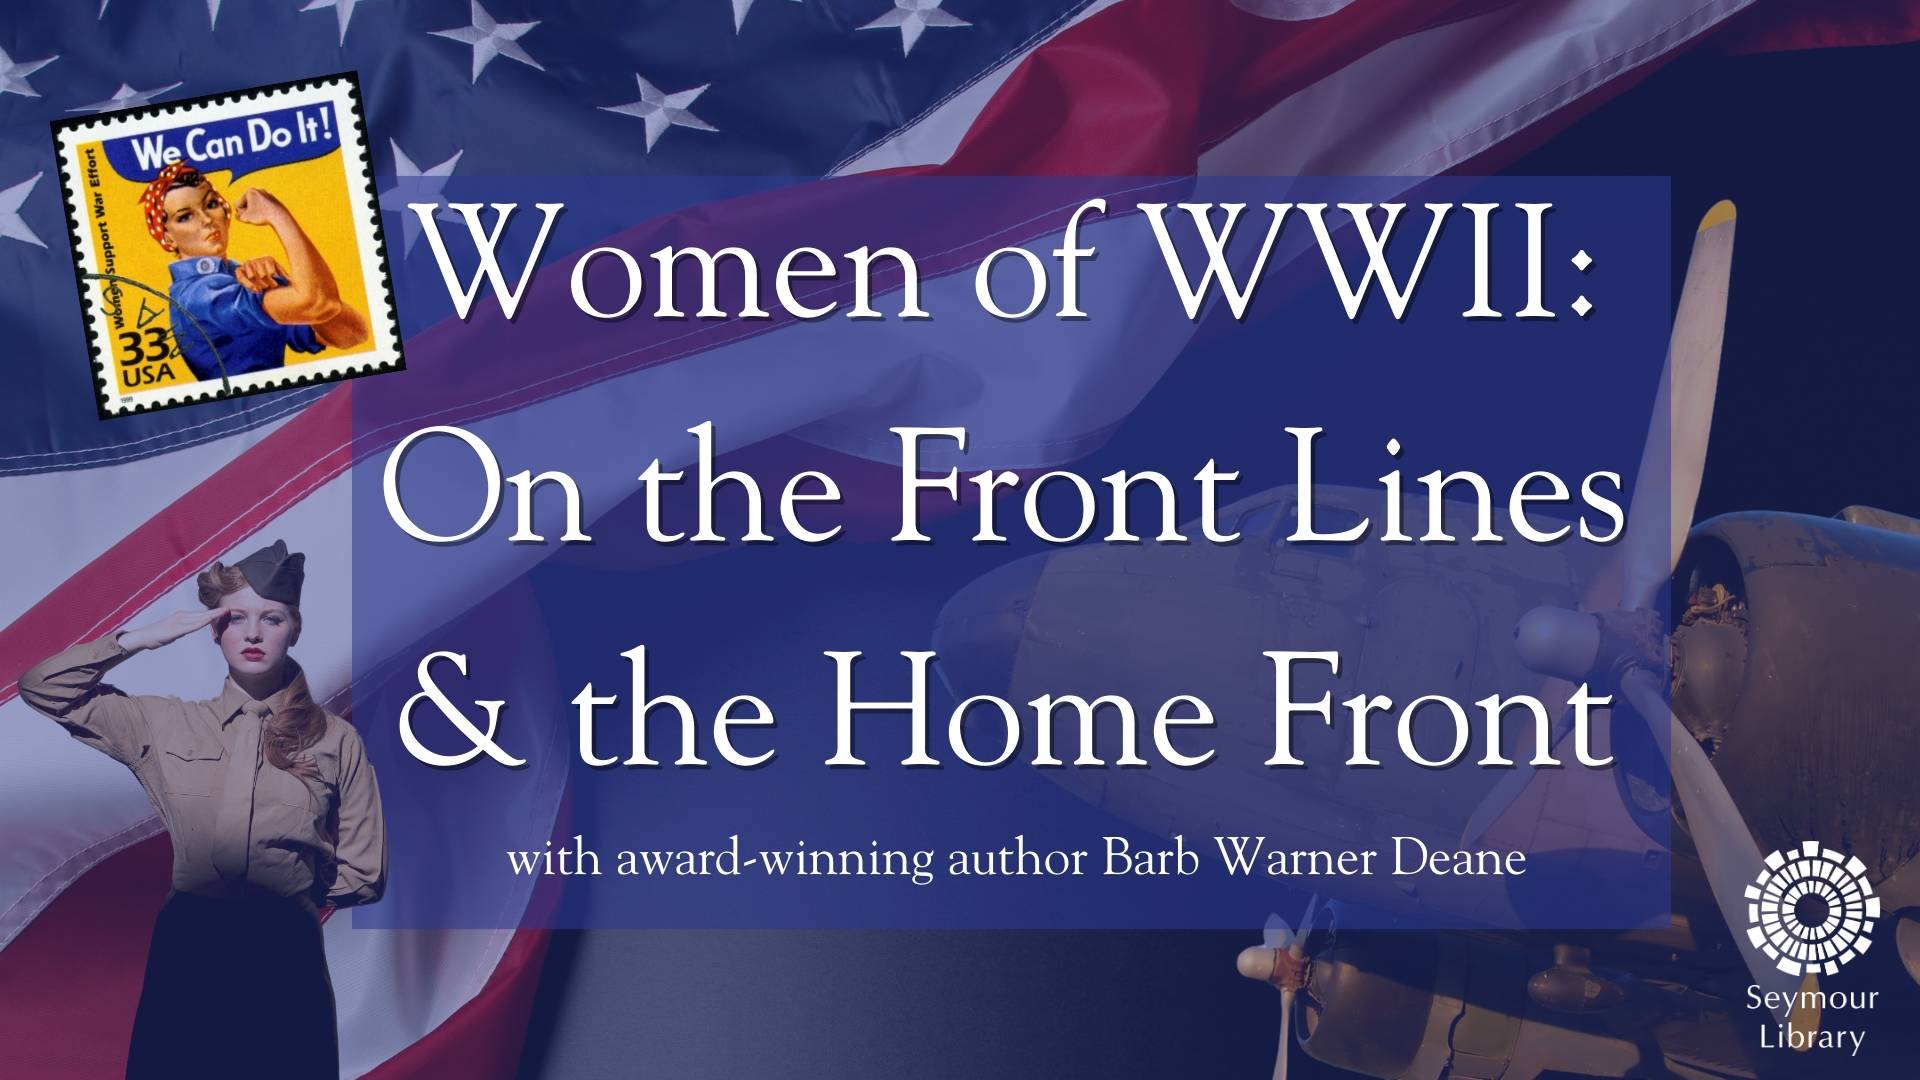 Women of WWII: On the Front Lines & the Home Front with award winning author Barbara Warner Deane -- collage image of Rosie the Riveter, a WWII plane, a woman saluting, the American flag, and the Seymour Library logo.